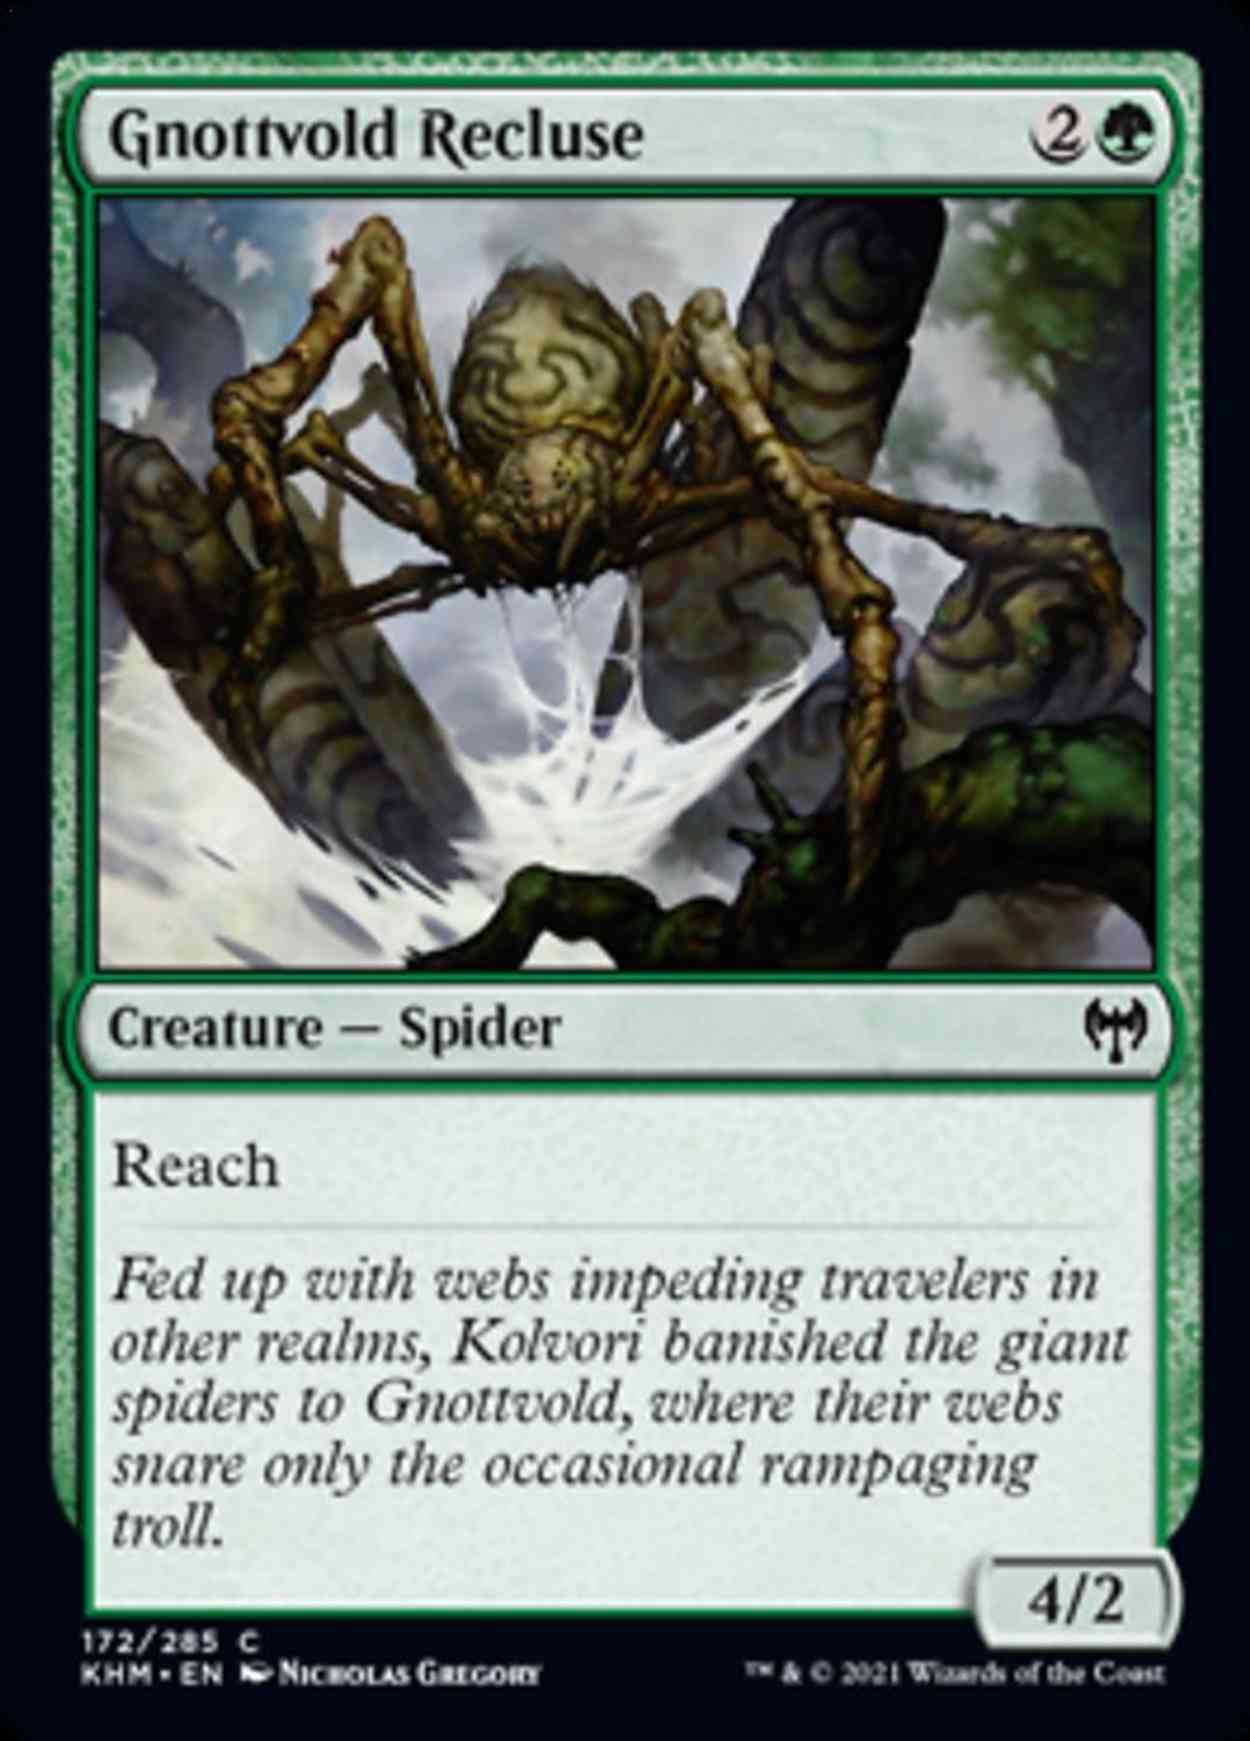 Gnottvold Recluse magic card front